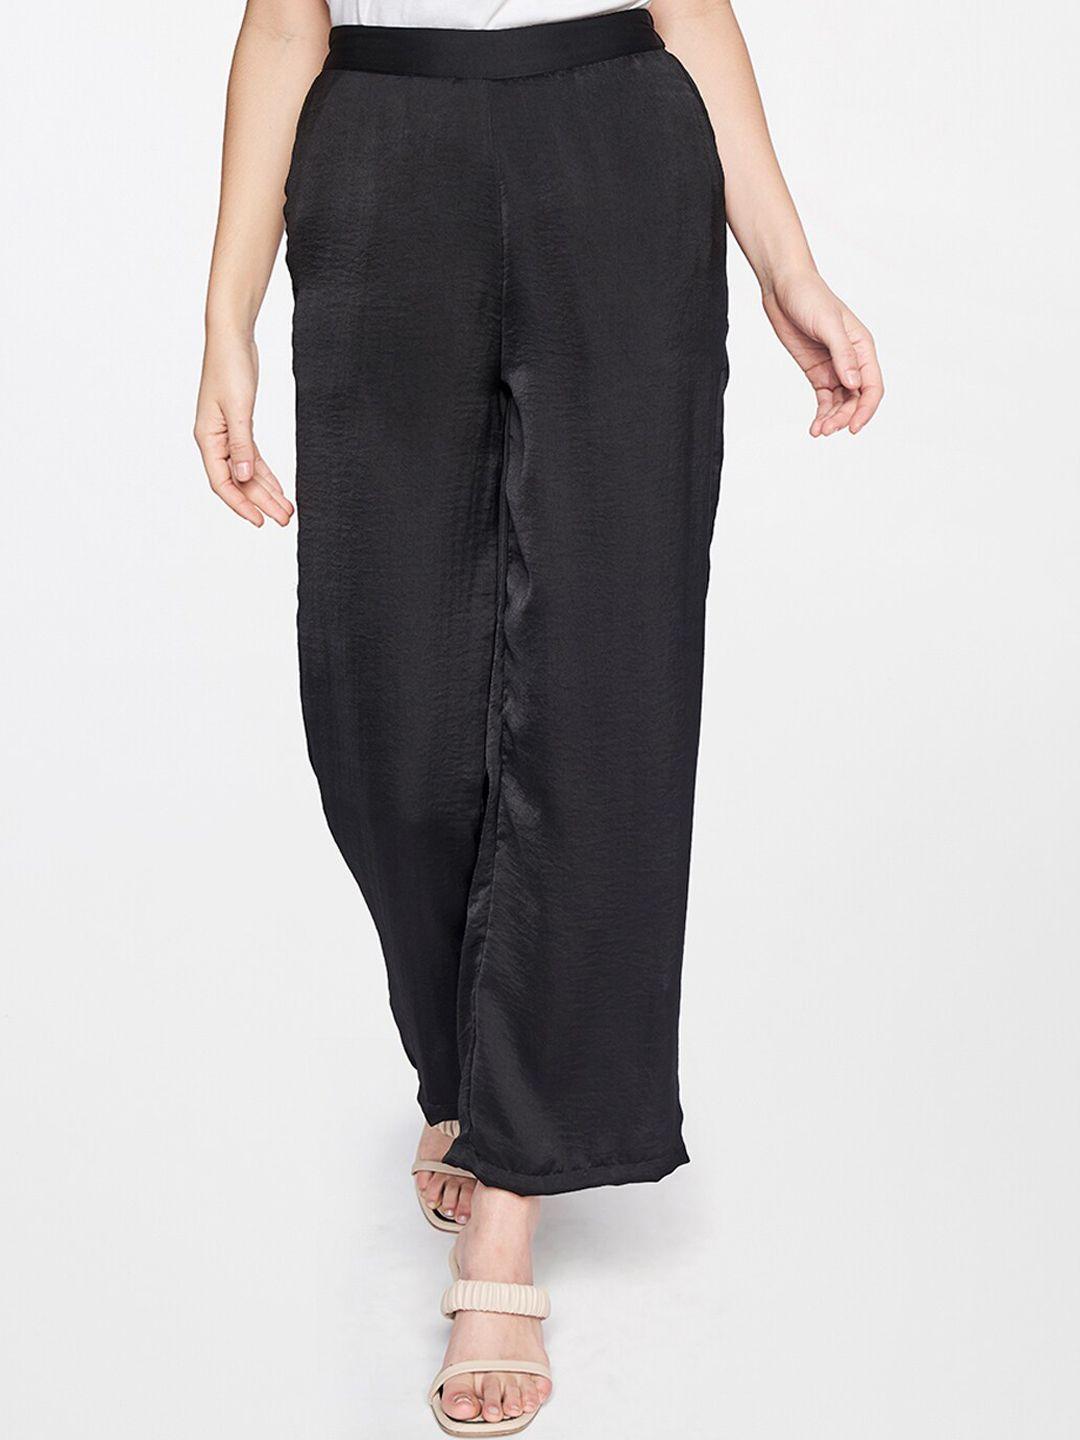 and-women-black-trousers